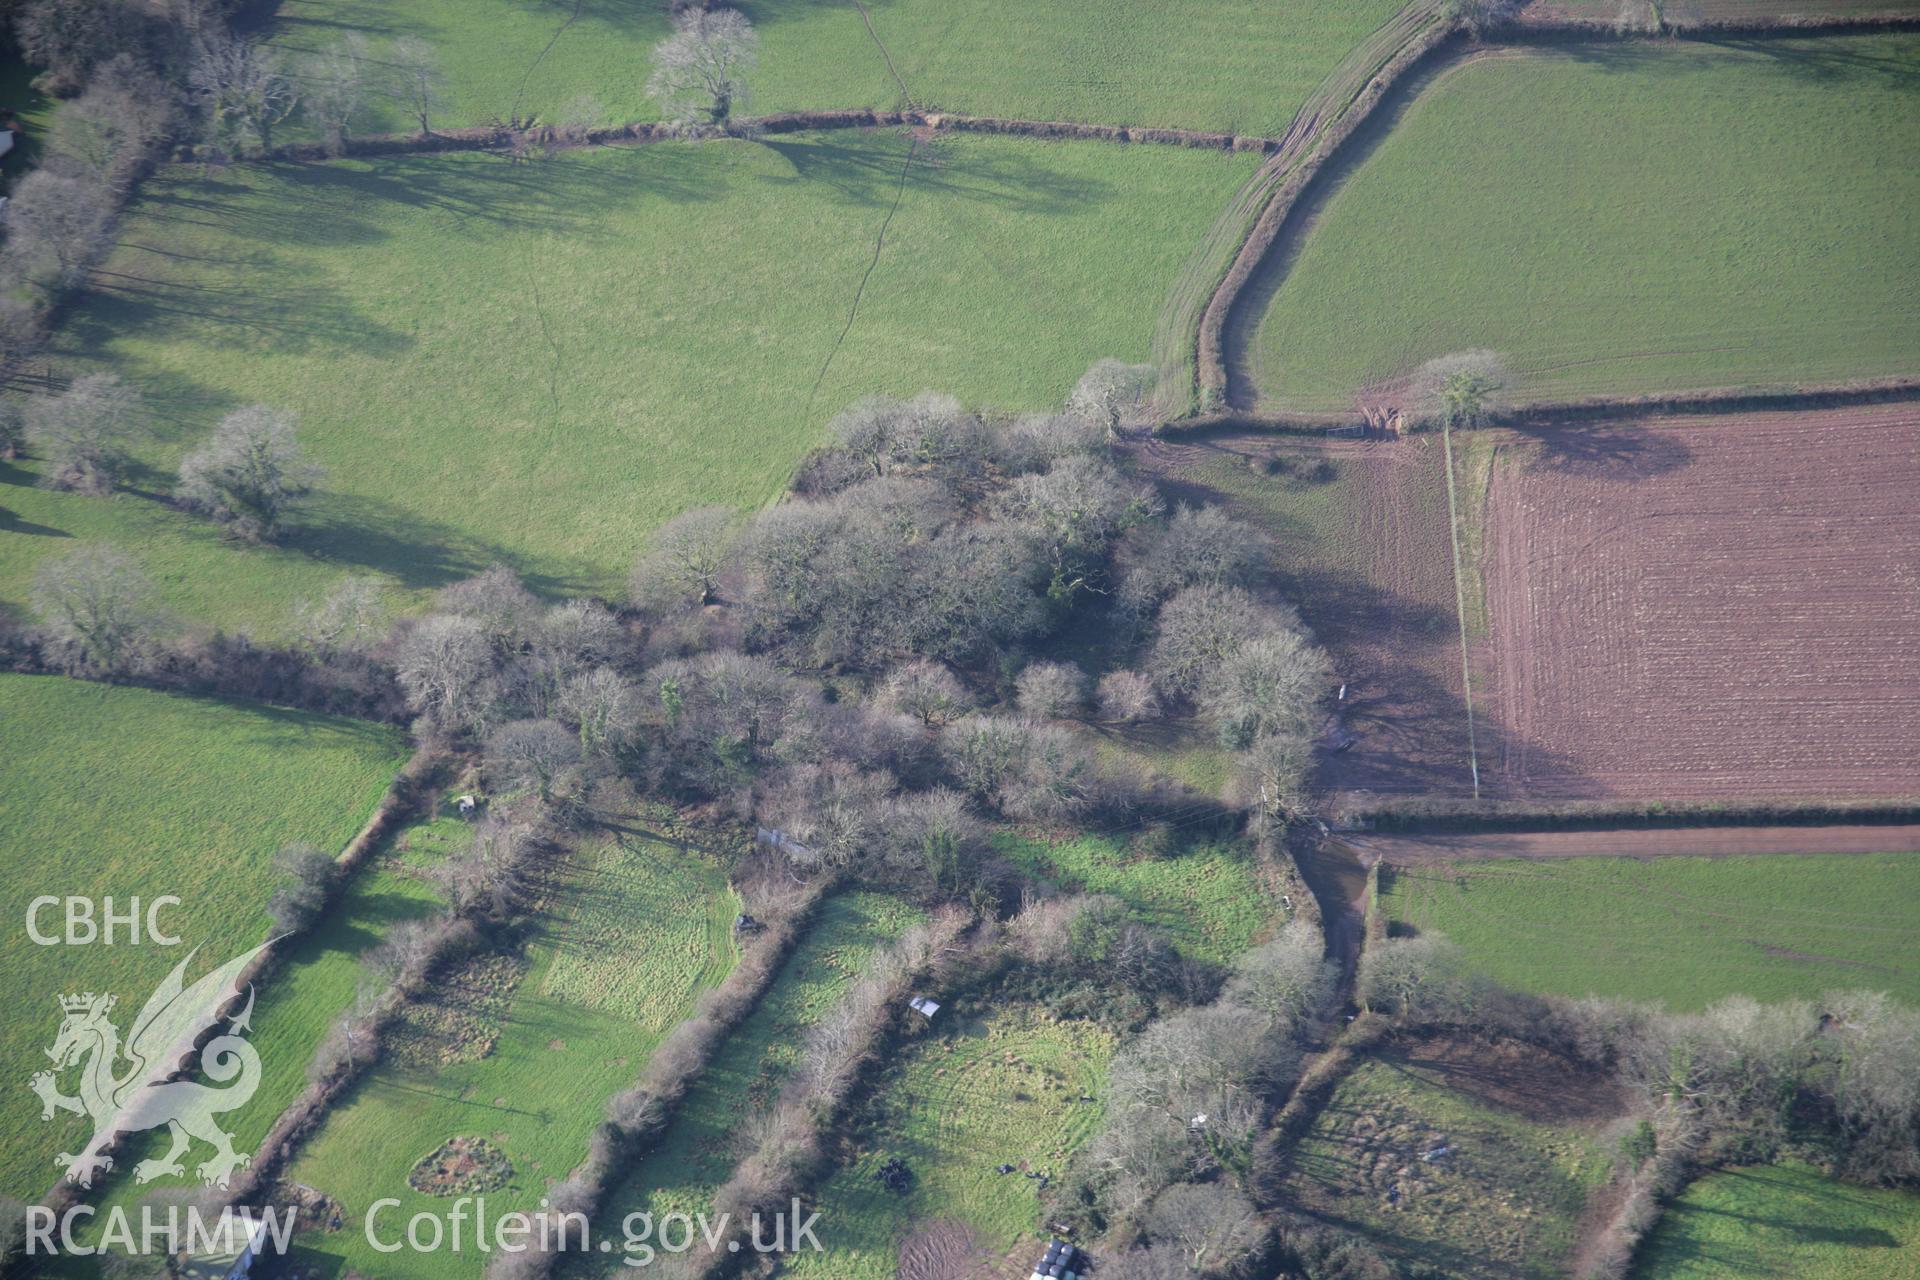 RCAHMW colour oblique aerial photograph of Sentence Castle. Taken on 11 January 2006 by Toby Driver.